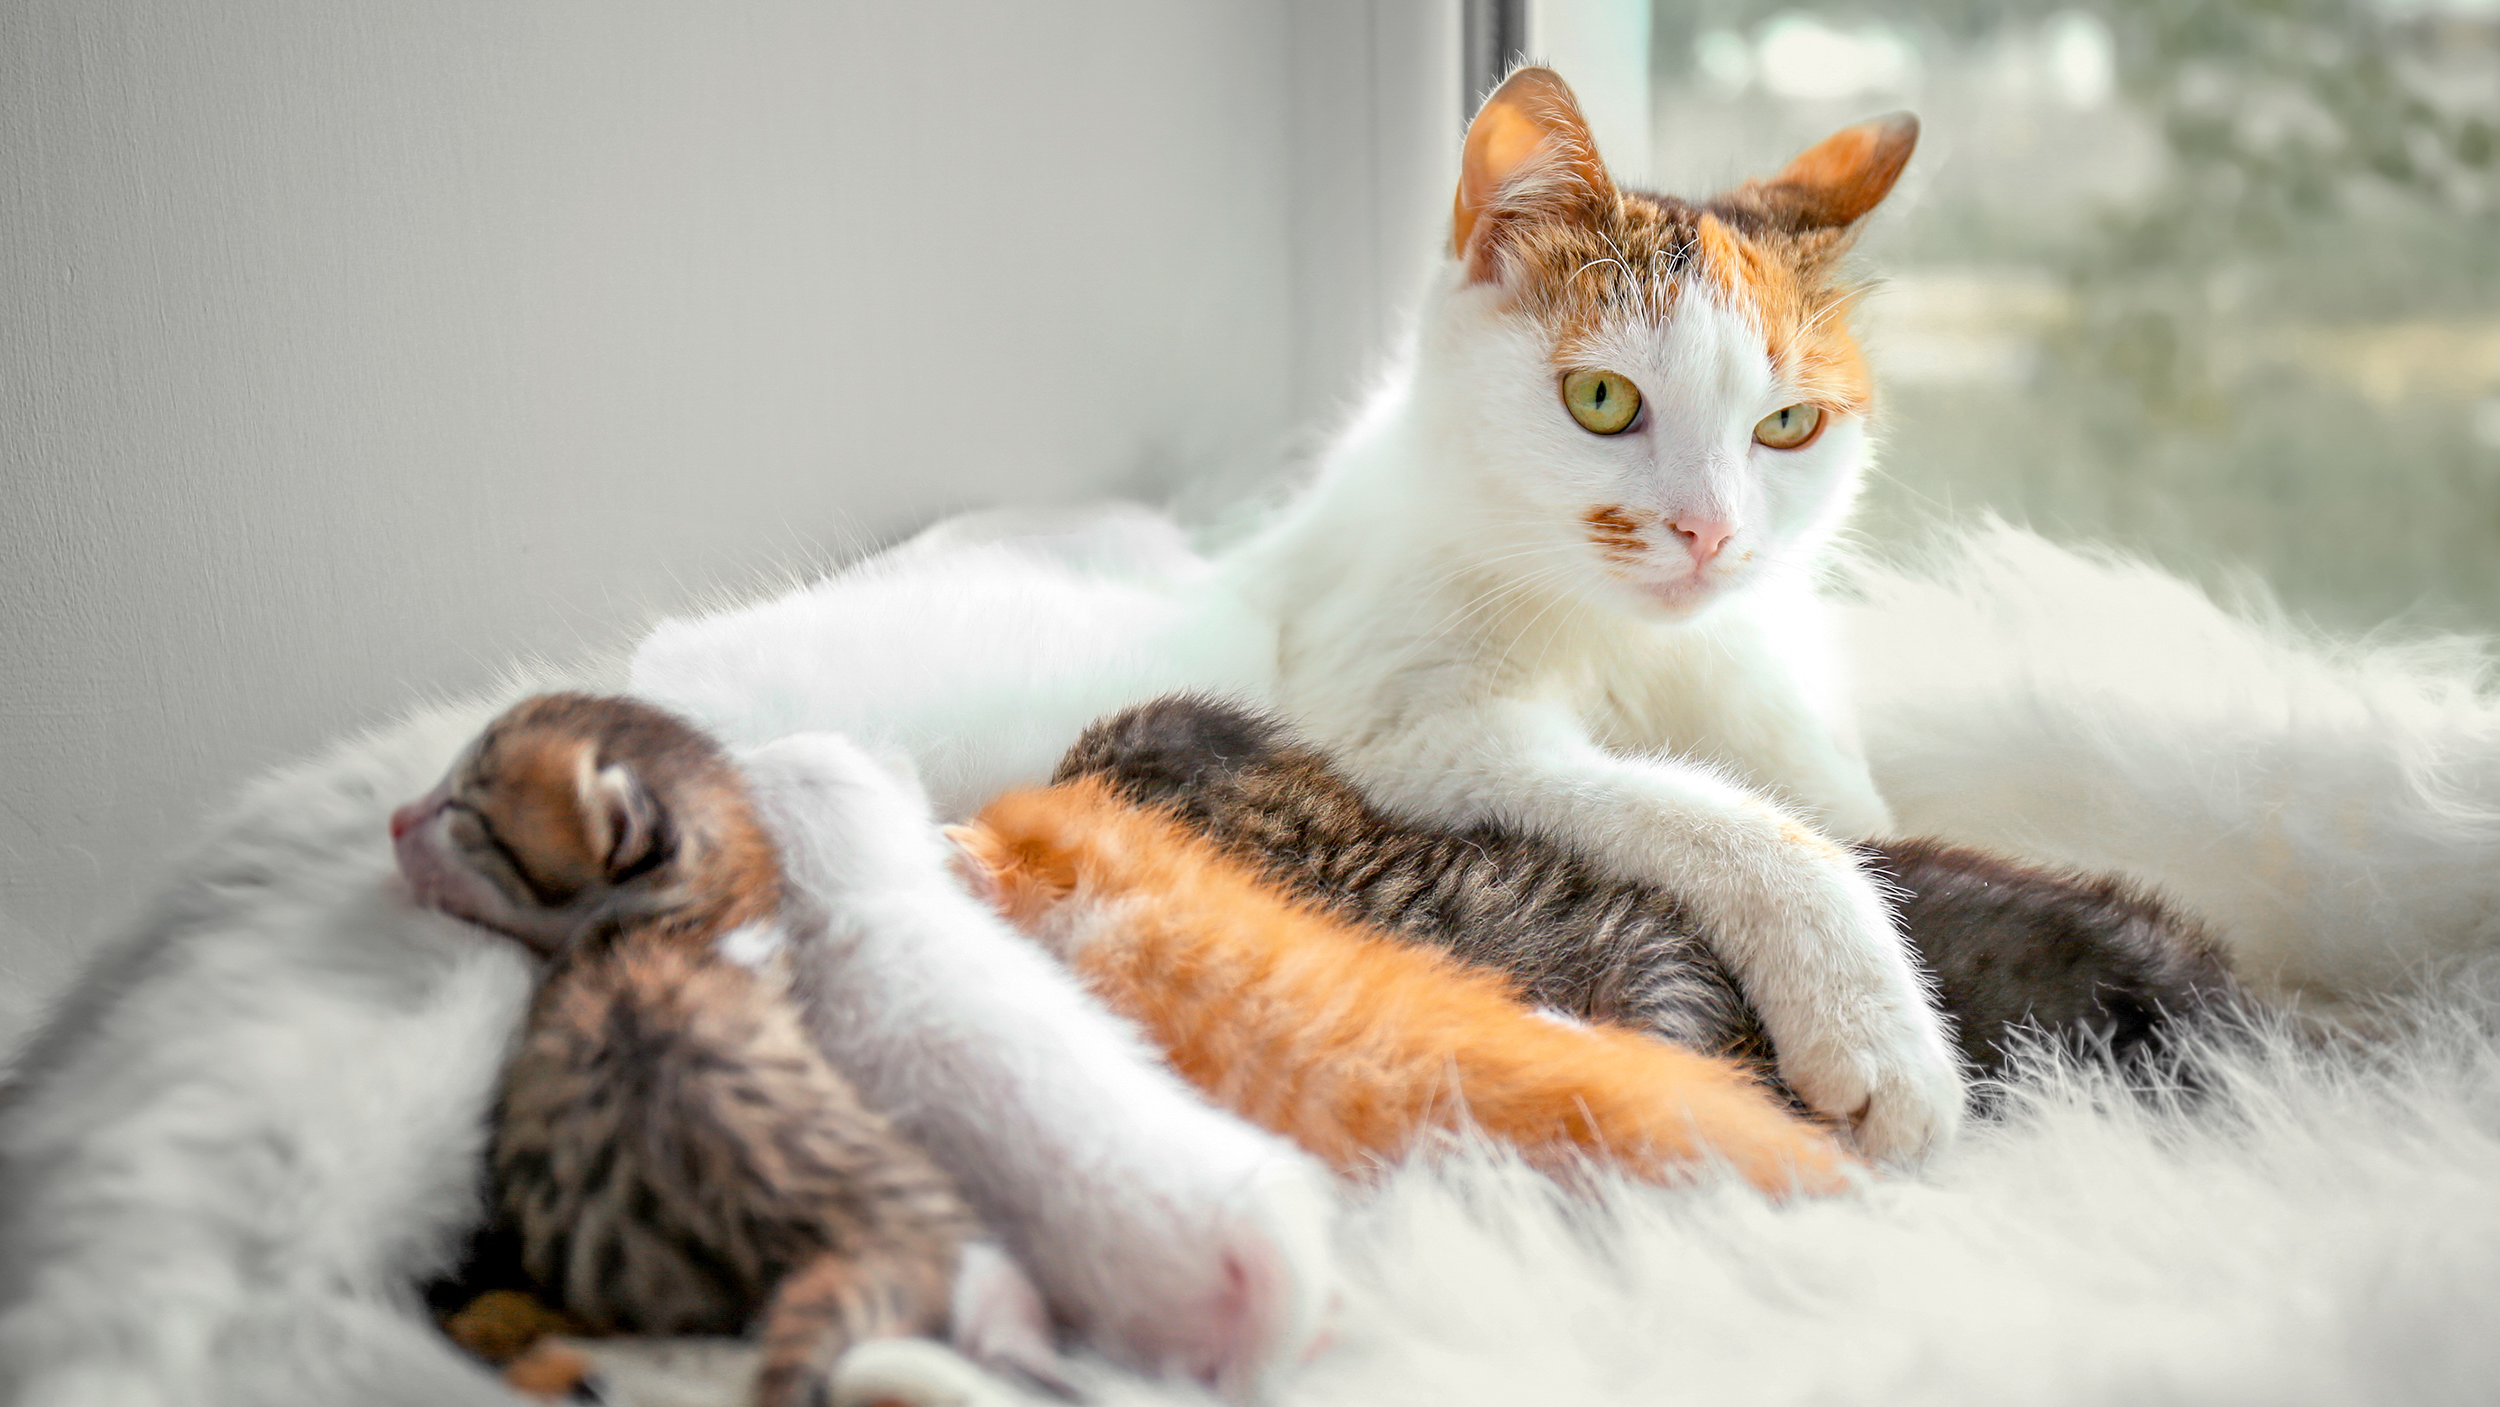 How to Tell If Your Cat Is Pregnant Without A Vet?